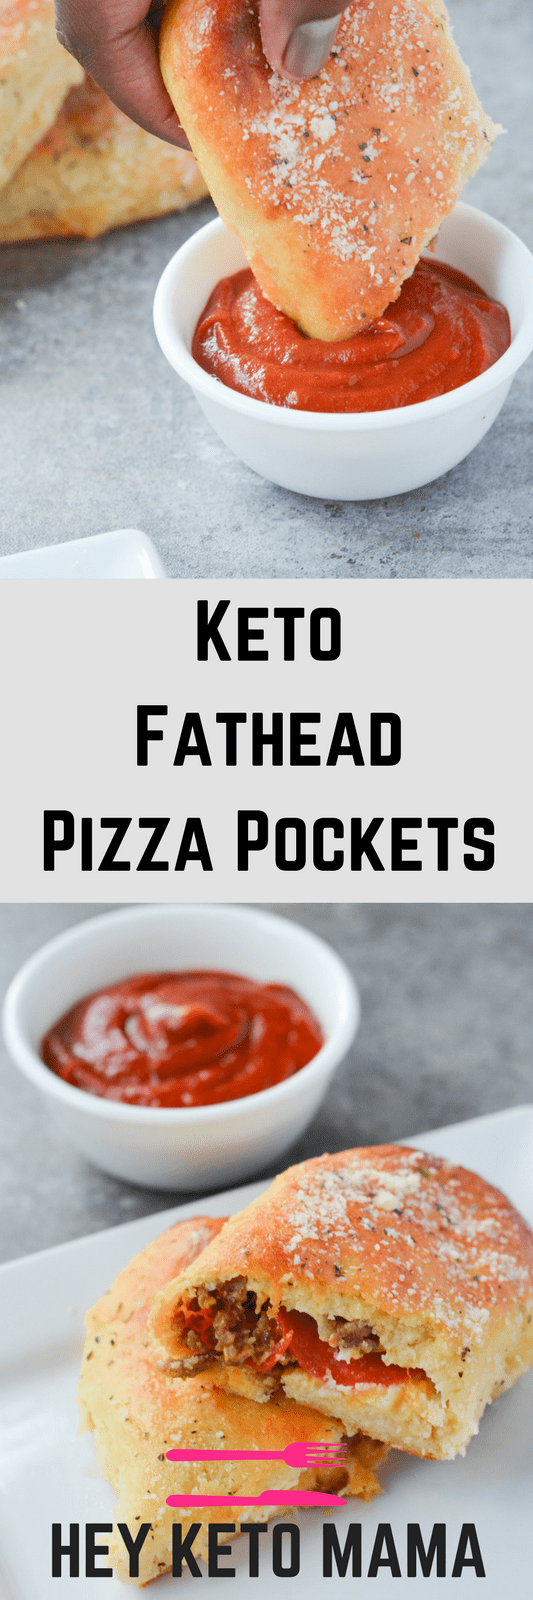 These Keto Fathead Pizza Pockets are delicious proof that going low carb does not mean giving up your favorite foods! | heyketomama.com